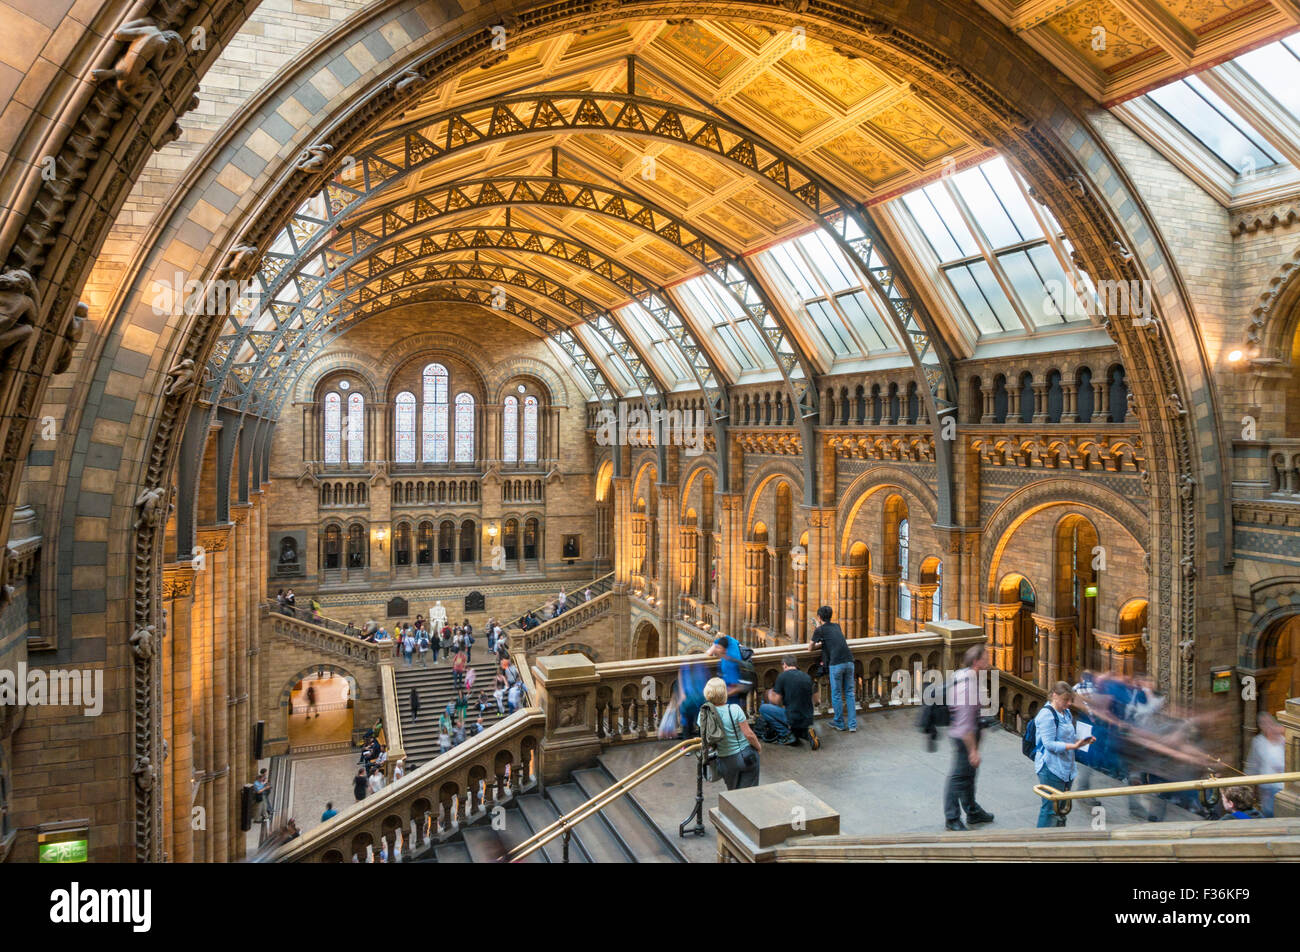 Visitors inside the Central hall of the Natural History Museum  Exhibition road South Kensington London England GB UK EU Europe Stock Photo